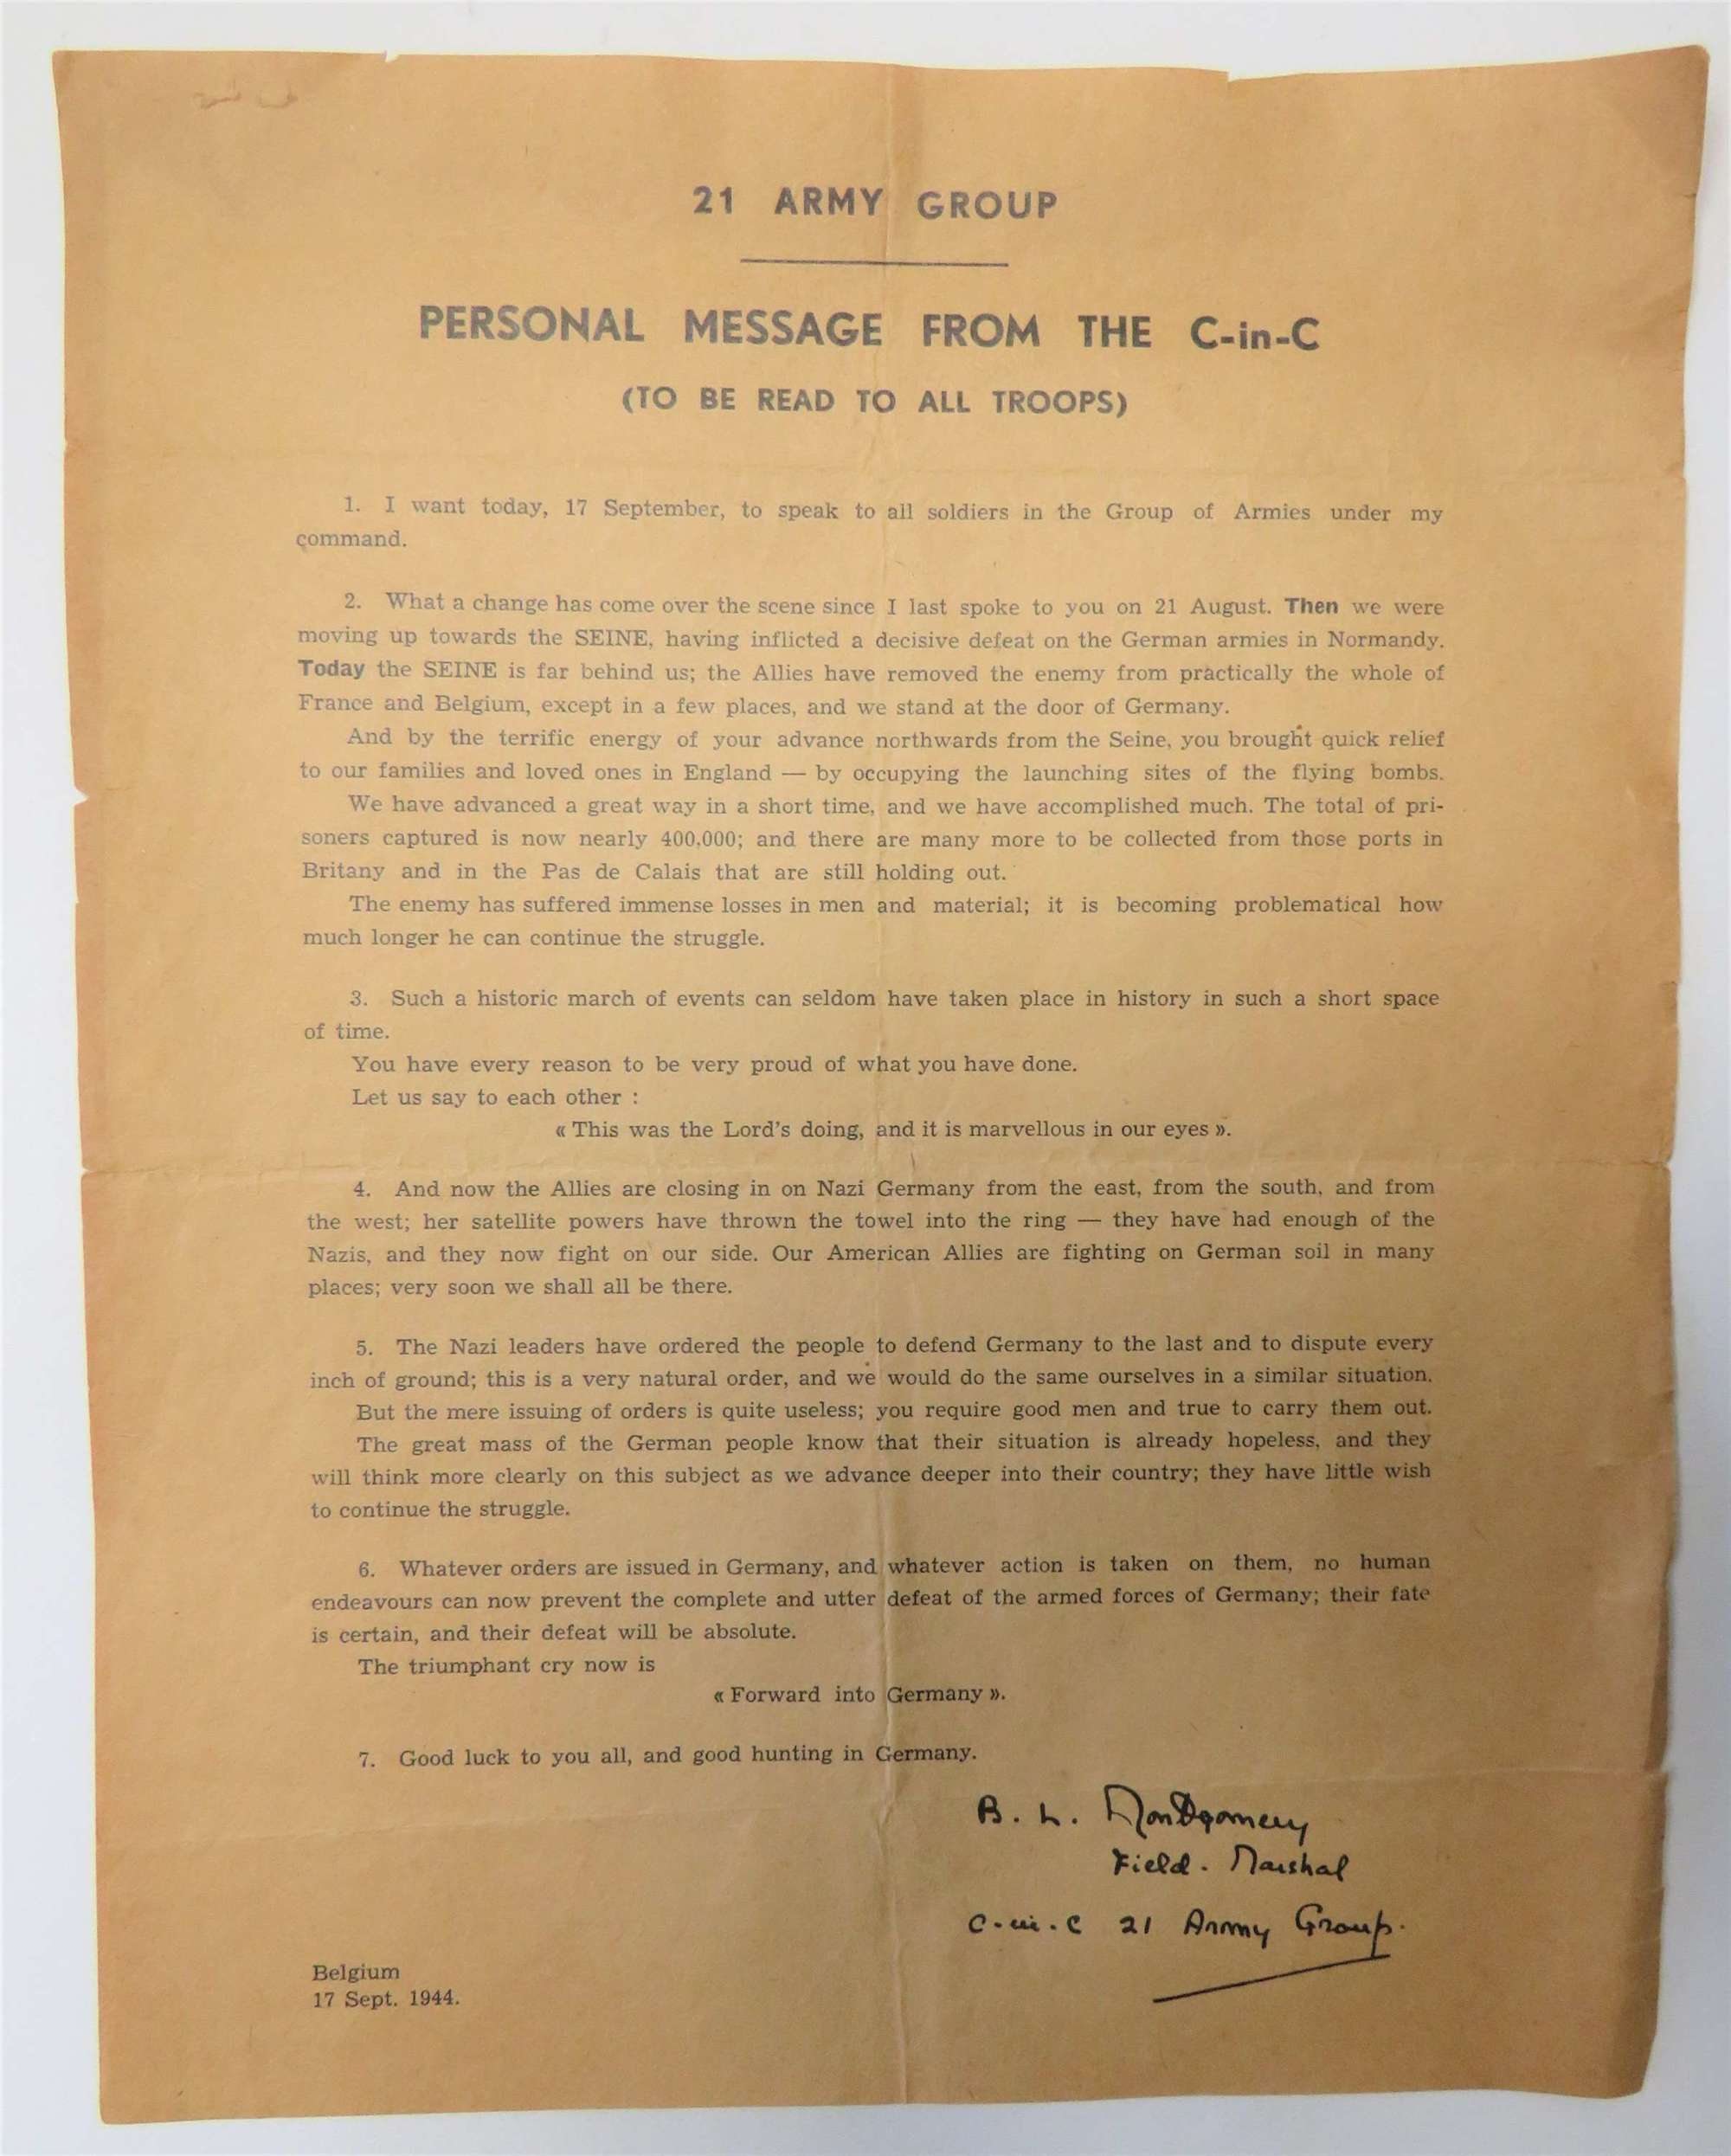 21st Army Group September 1944 Breakout Letter for all Troops